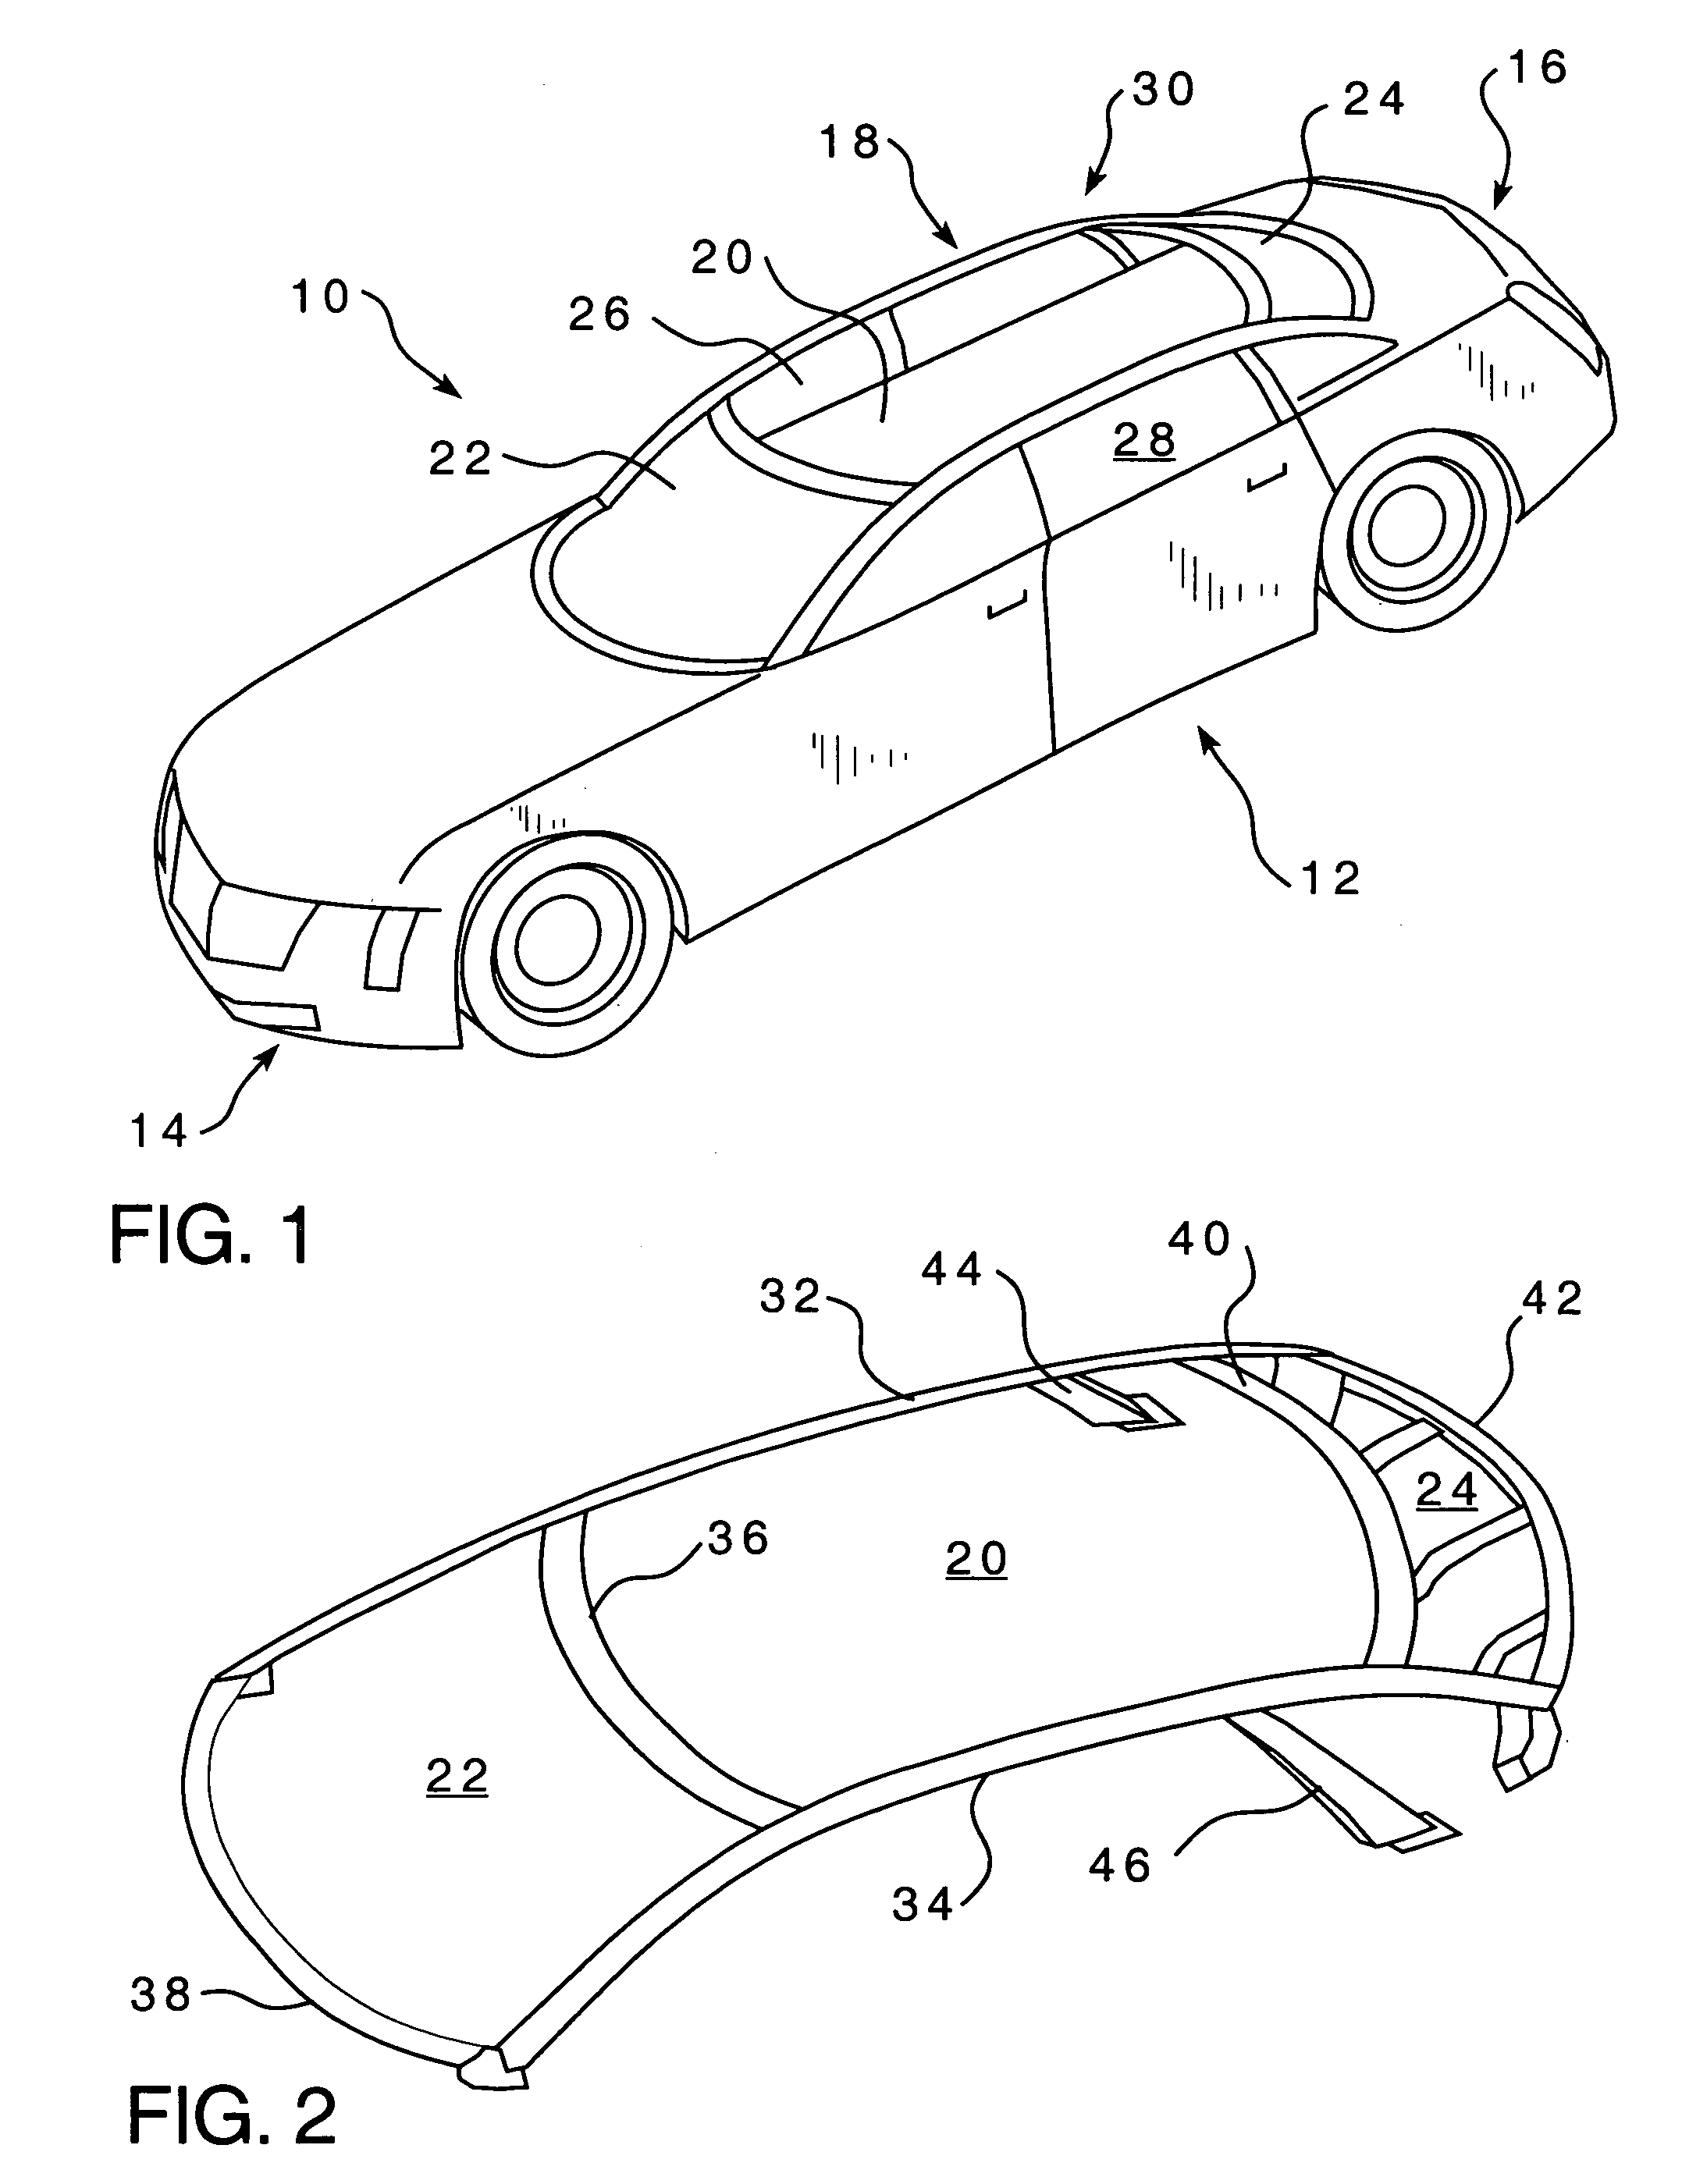 Antenna elements incorporated into the exterior structure of vehicle bodies